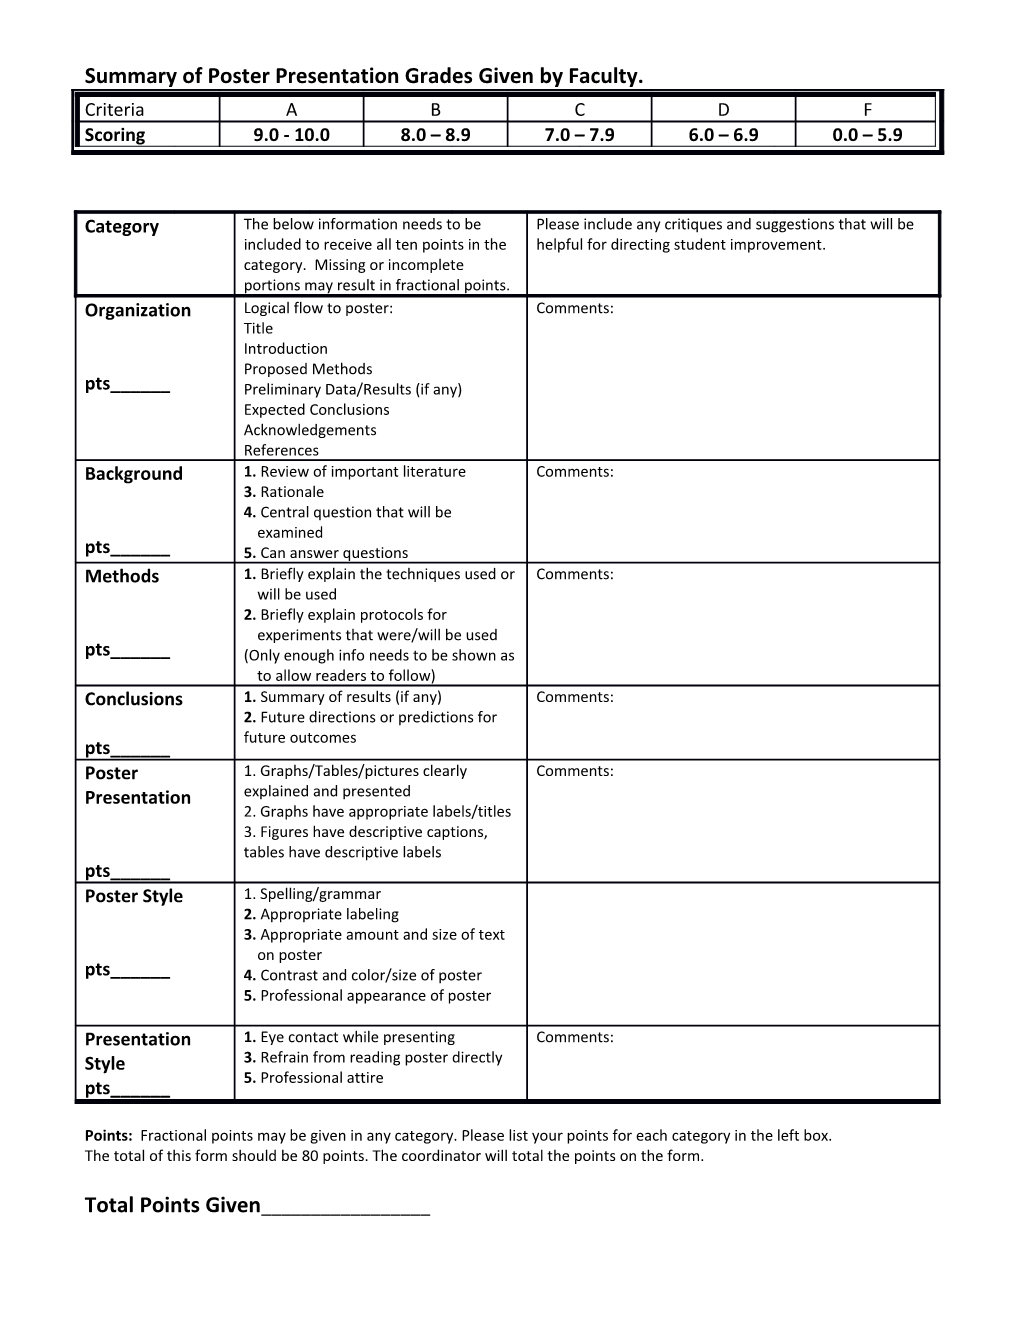 BIOL4222: Student Independent Research Grading Rubric